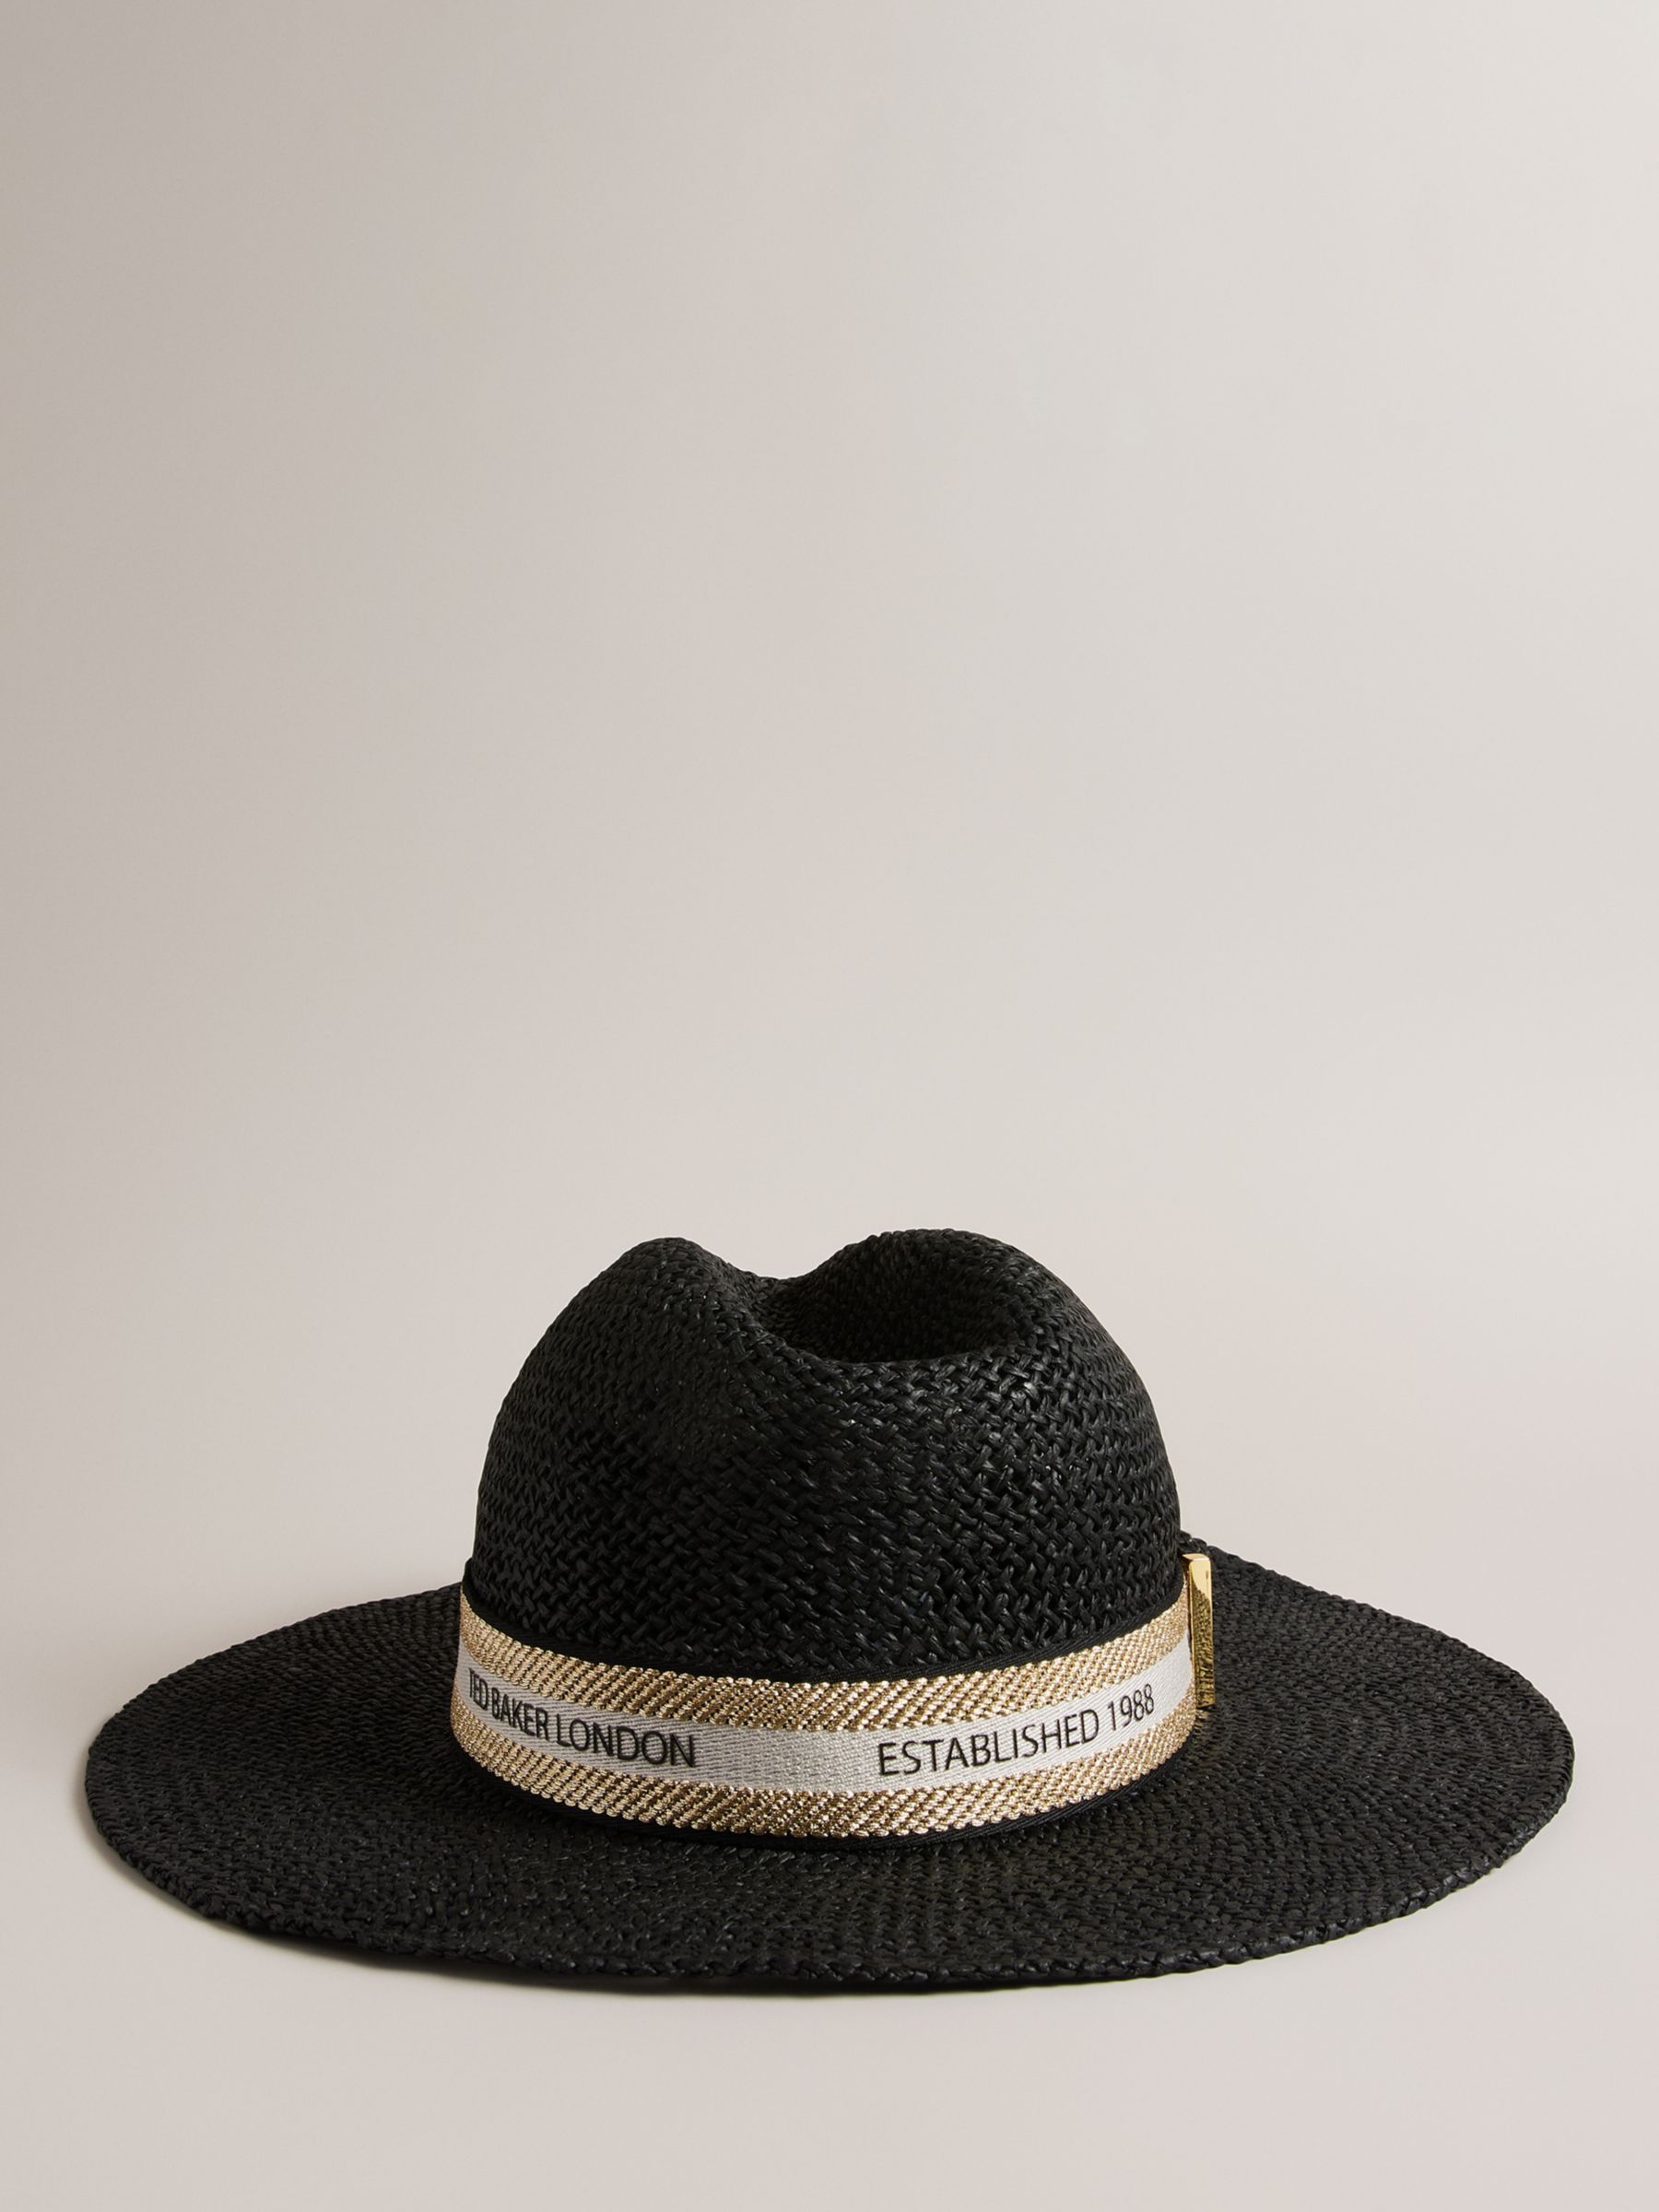 Ted Baker Clairie Straw Fedora Hat, Black, One Size